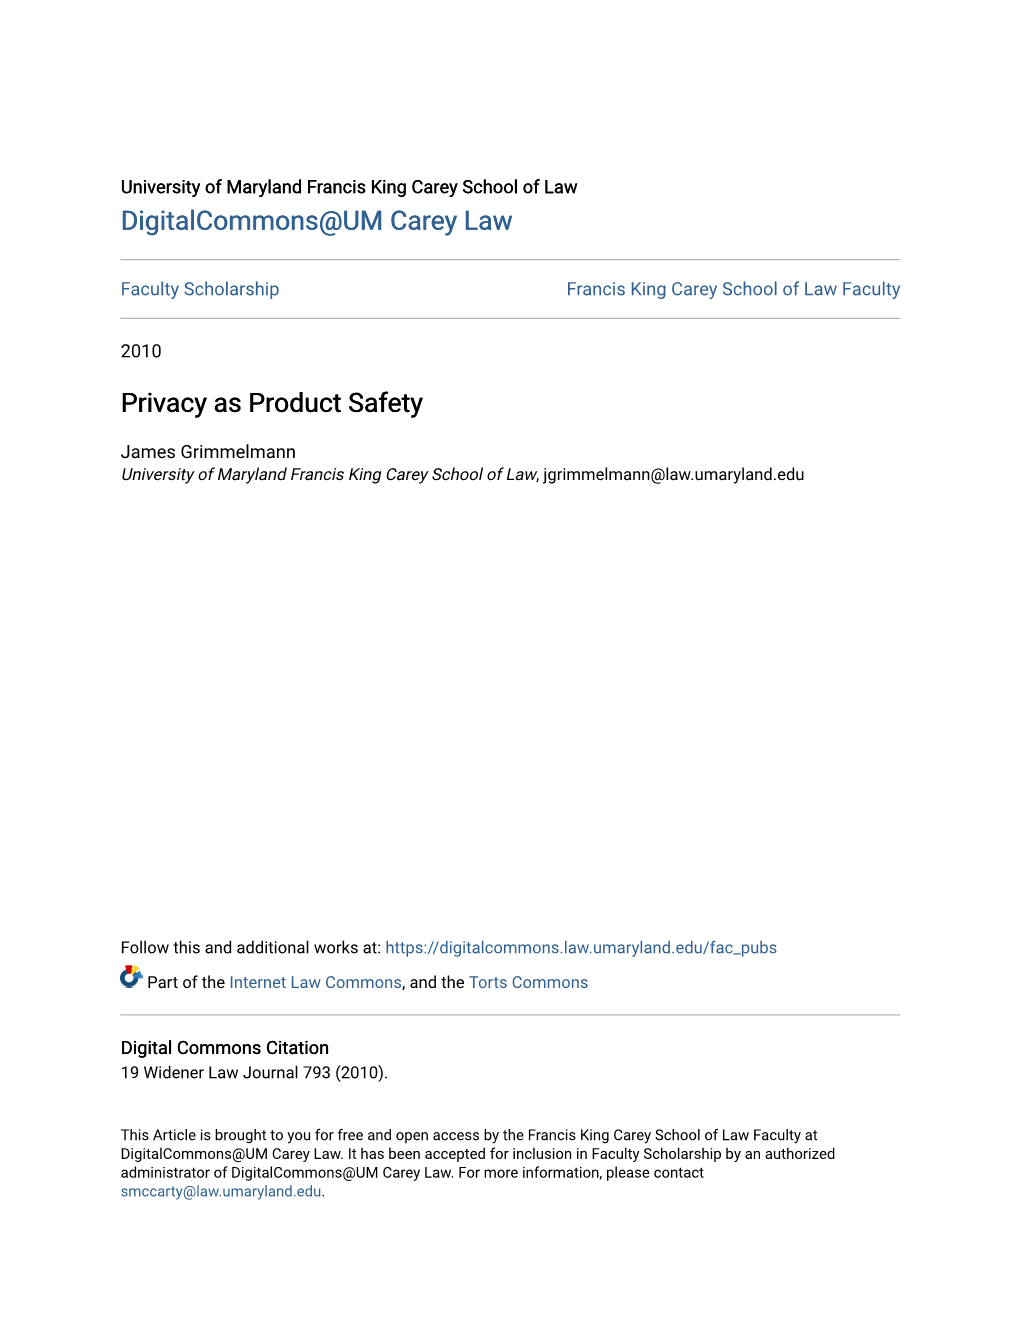 Privacy As Product Safety